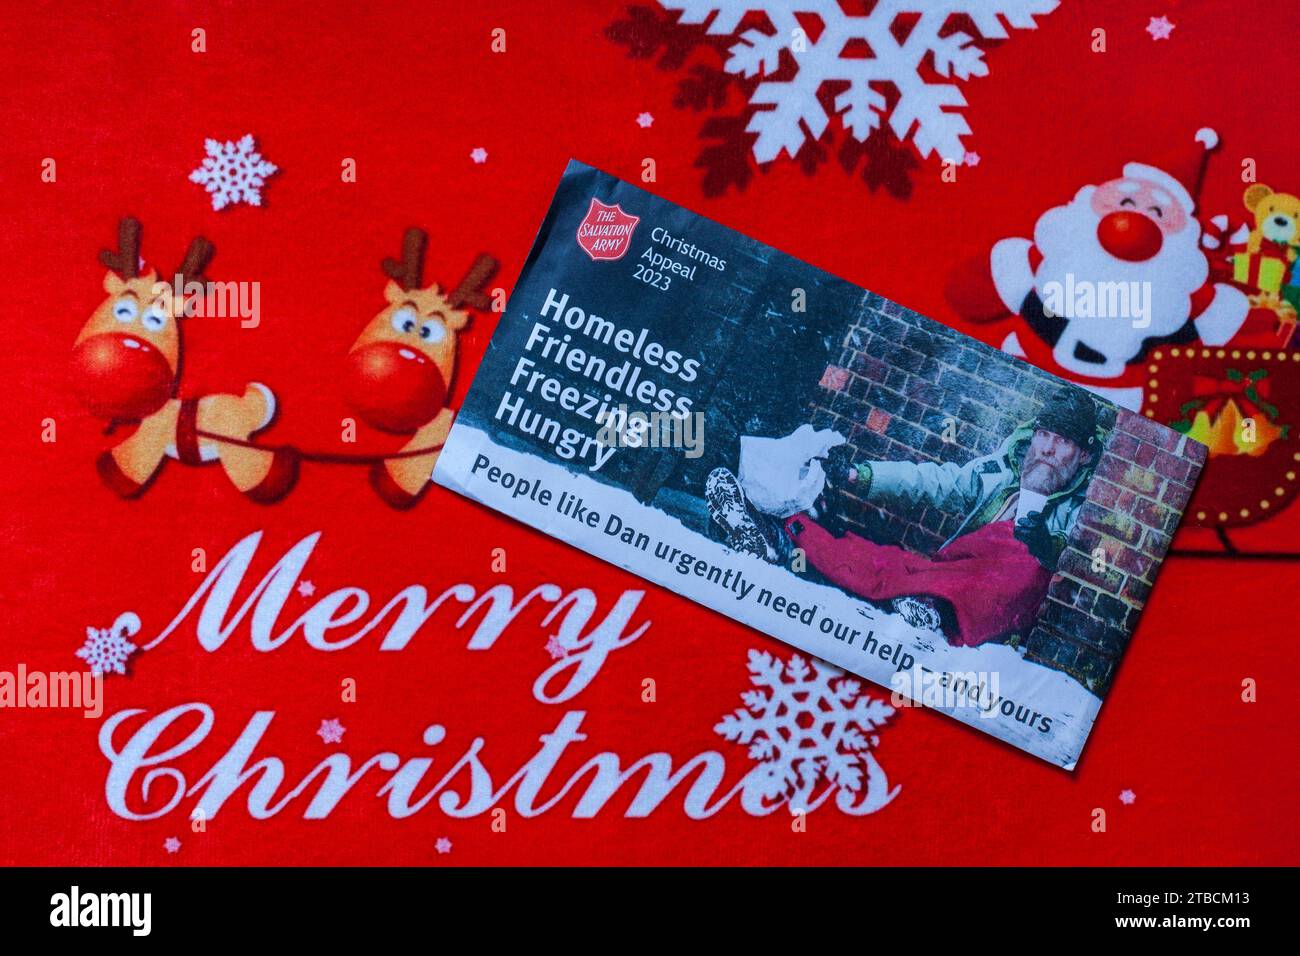 Post mail on Merry Christmas doormat - Christmas appeal 2023 from the Salvation Army, homeless friendless freezing hungry Stock Photo